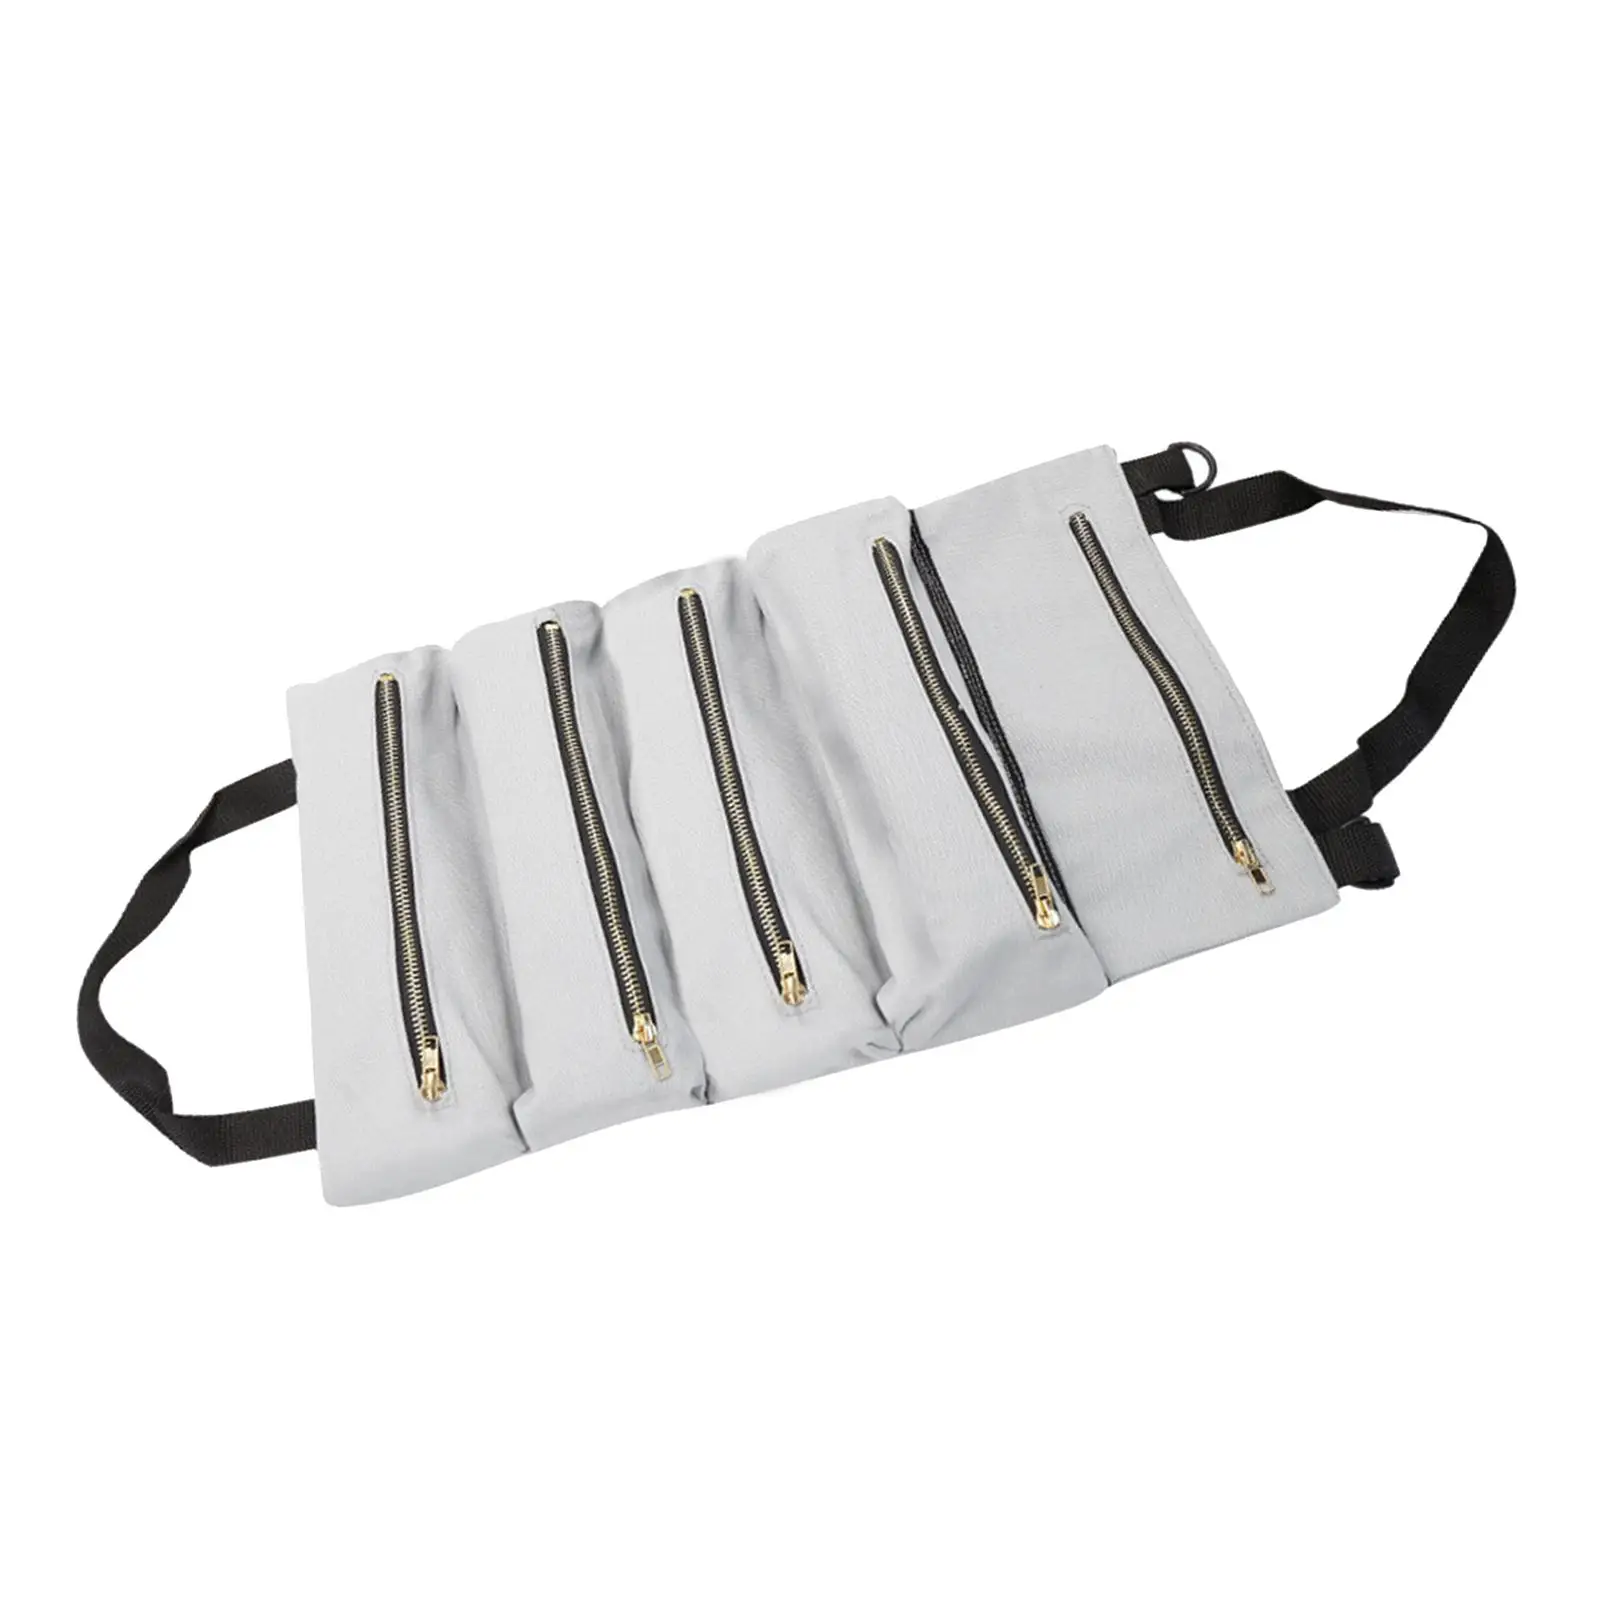 Roll up Tool Bag Wrench Organizer Foldable Pouches Multipurpose Tool Organizers Wrench Tools Pouch Small Tool Bag for Mechanic